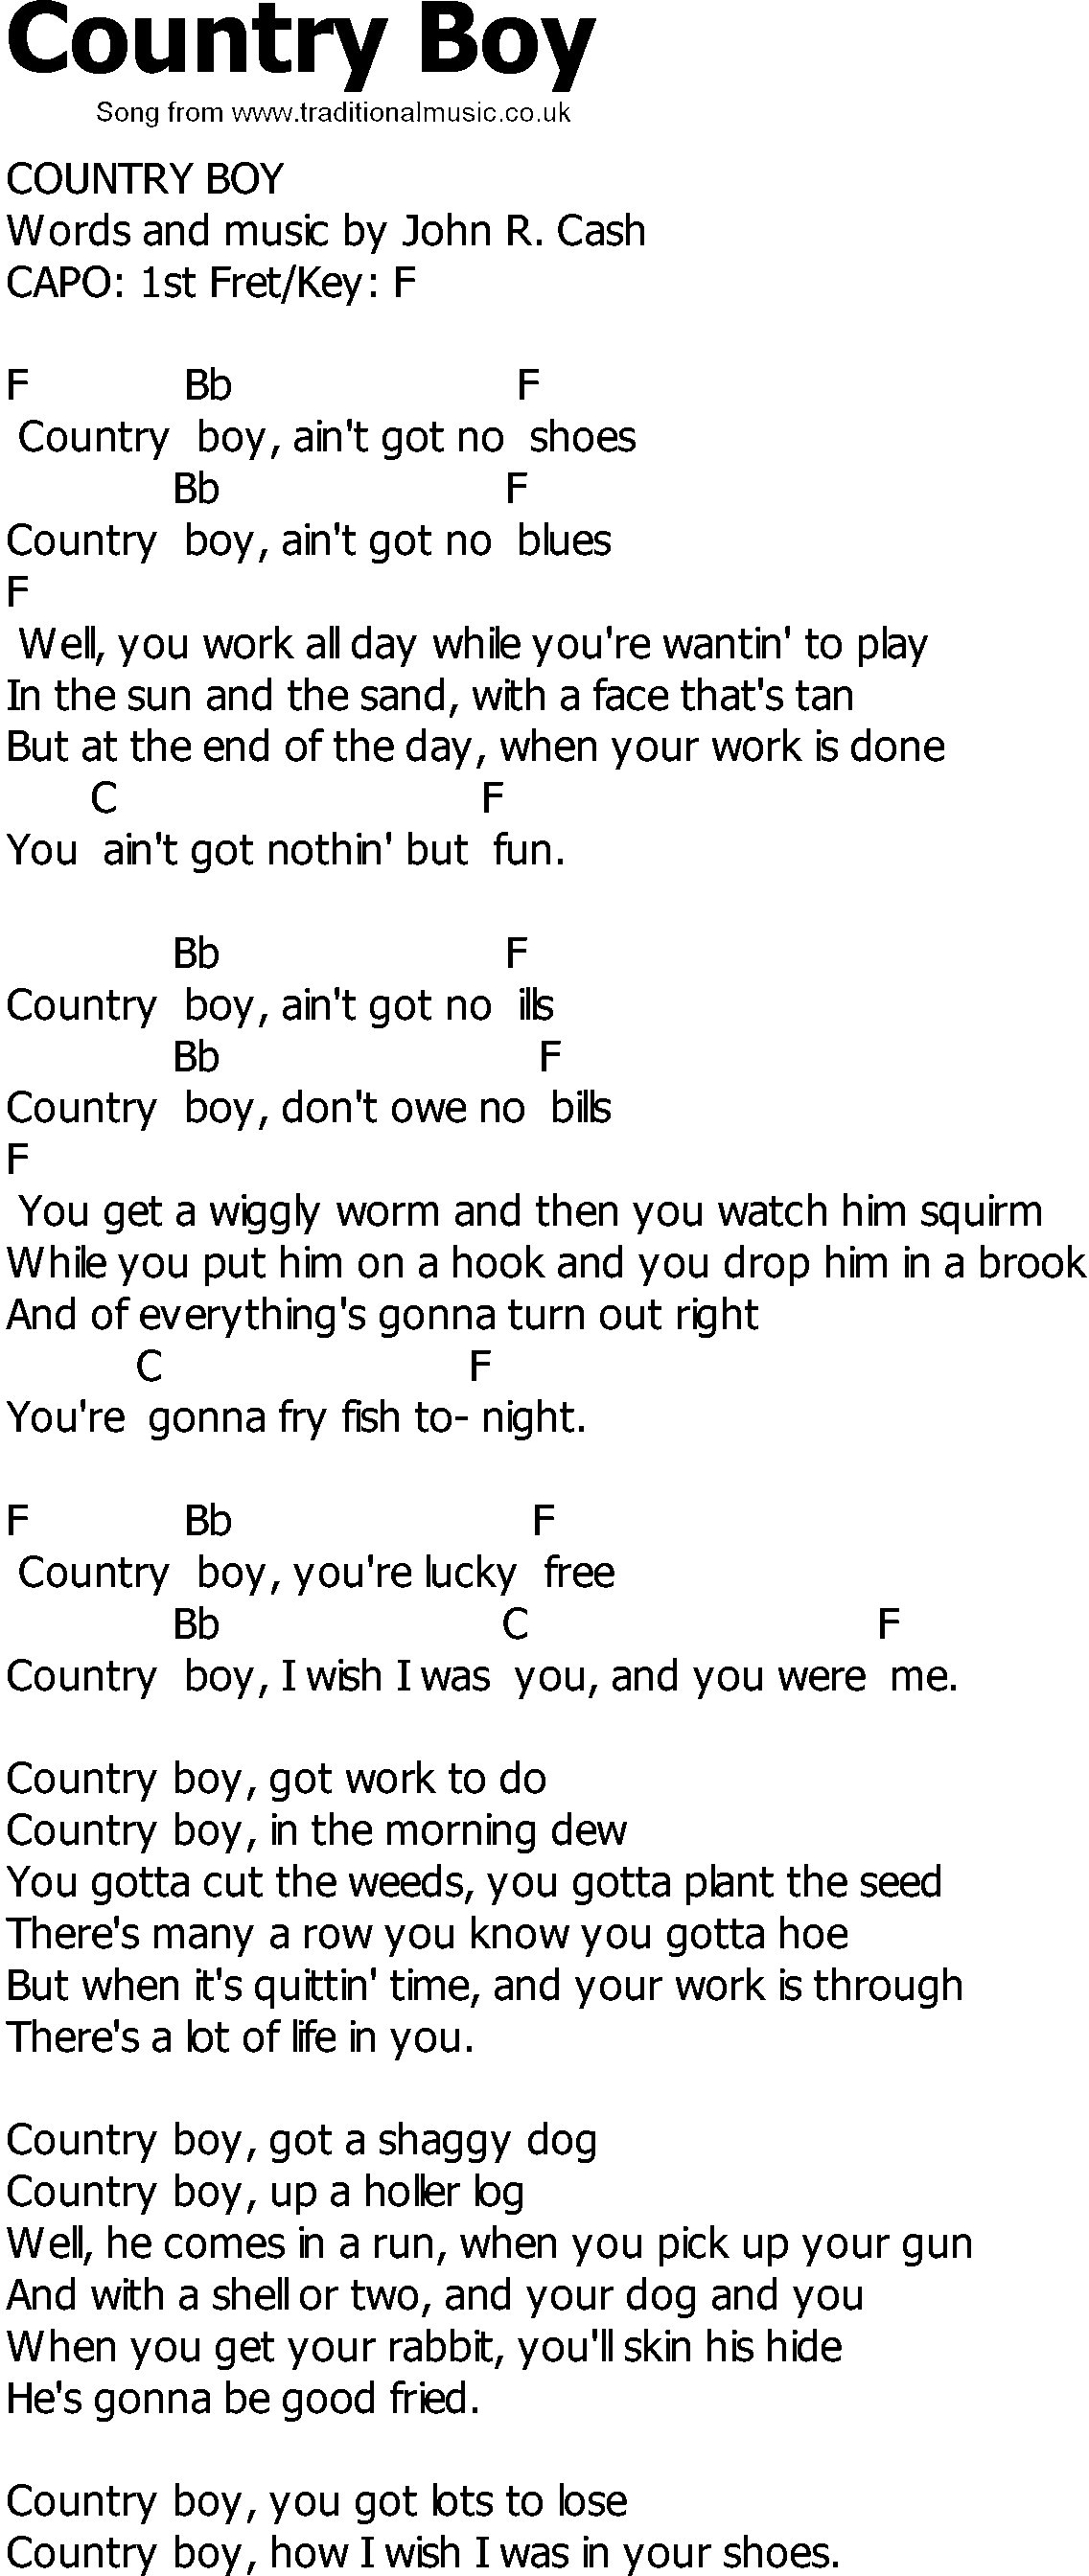 Old Country song lyrics with chords - Country Boy